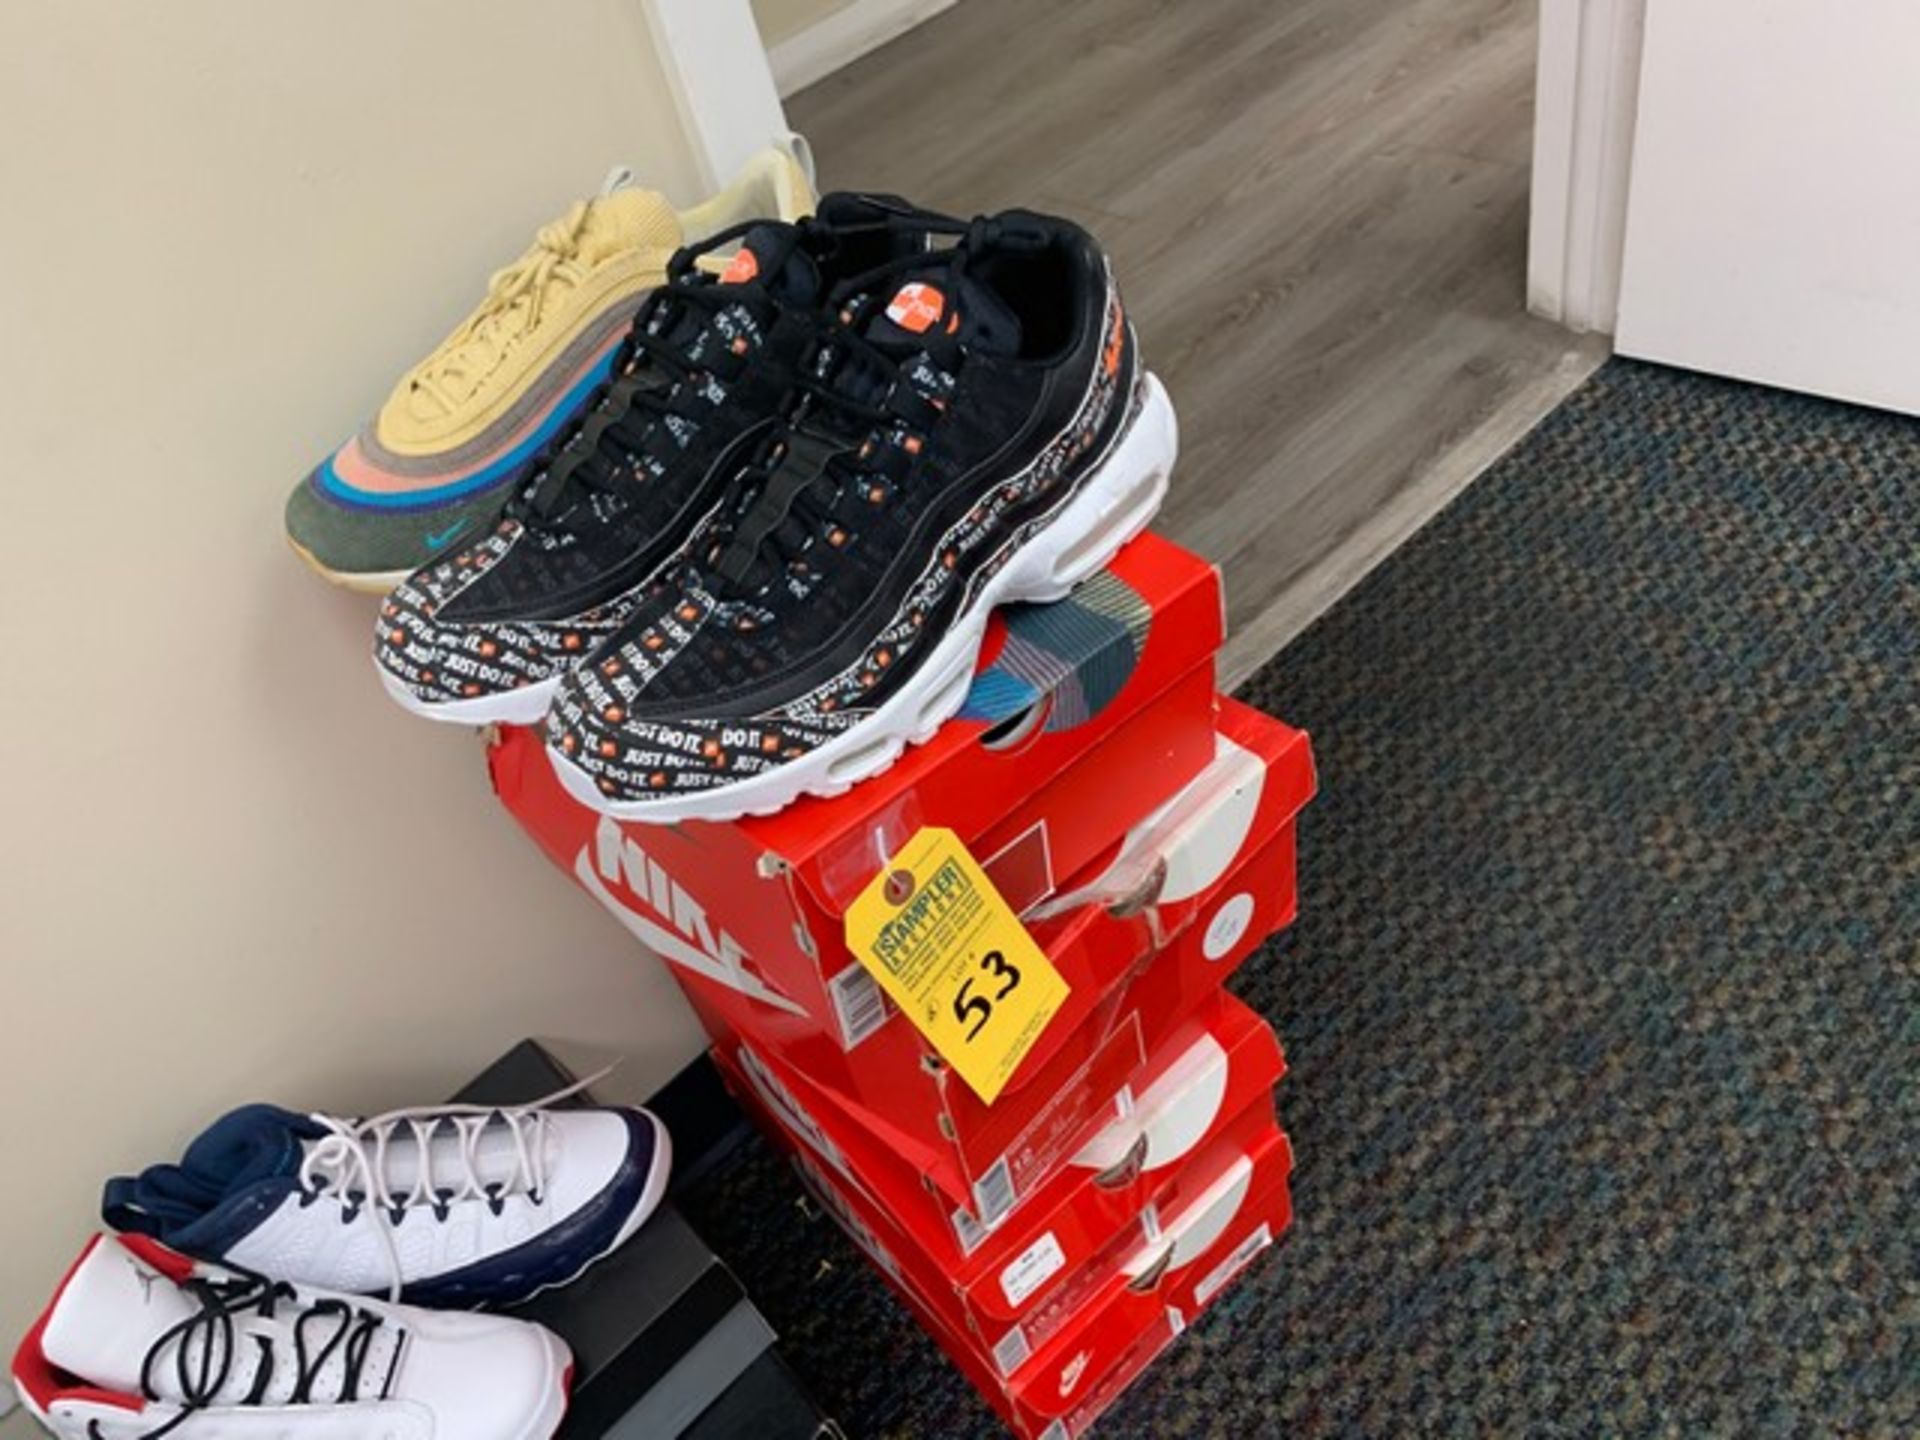 ASSORTED PAIR NIKE SHOES - AIRMAX, ETC